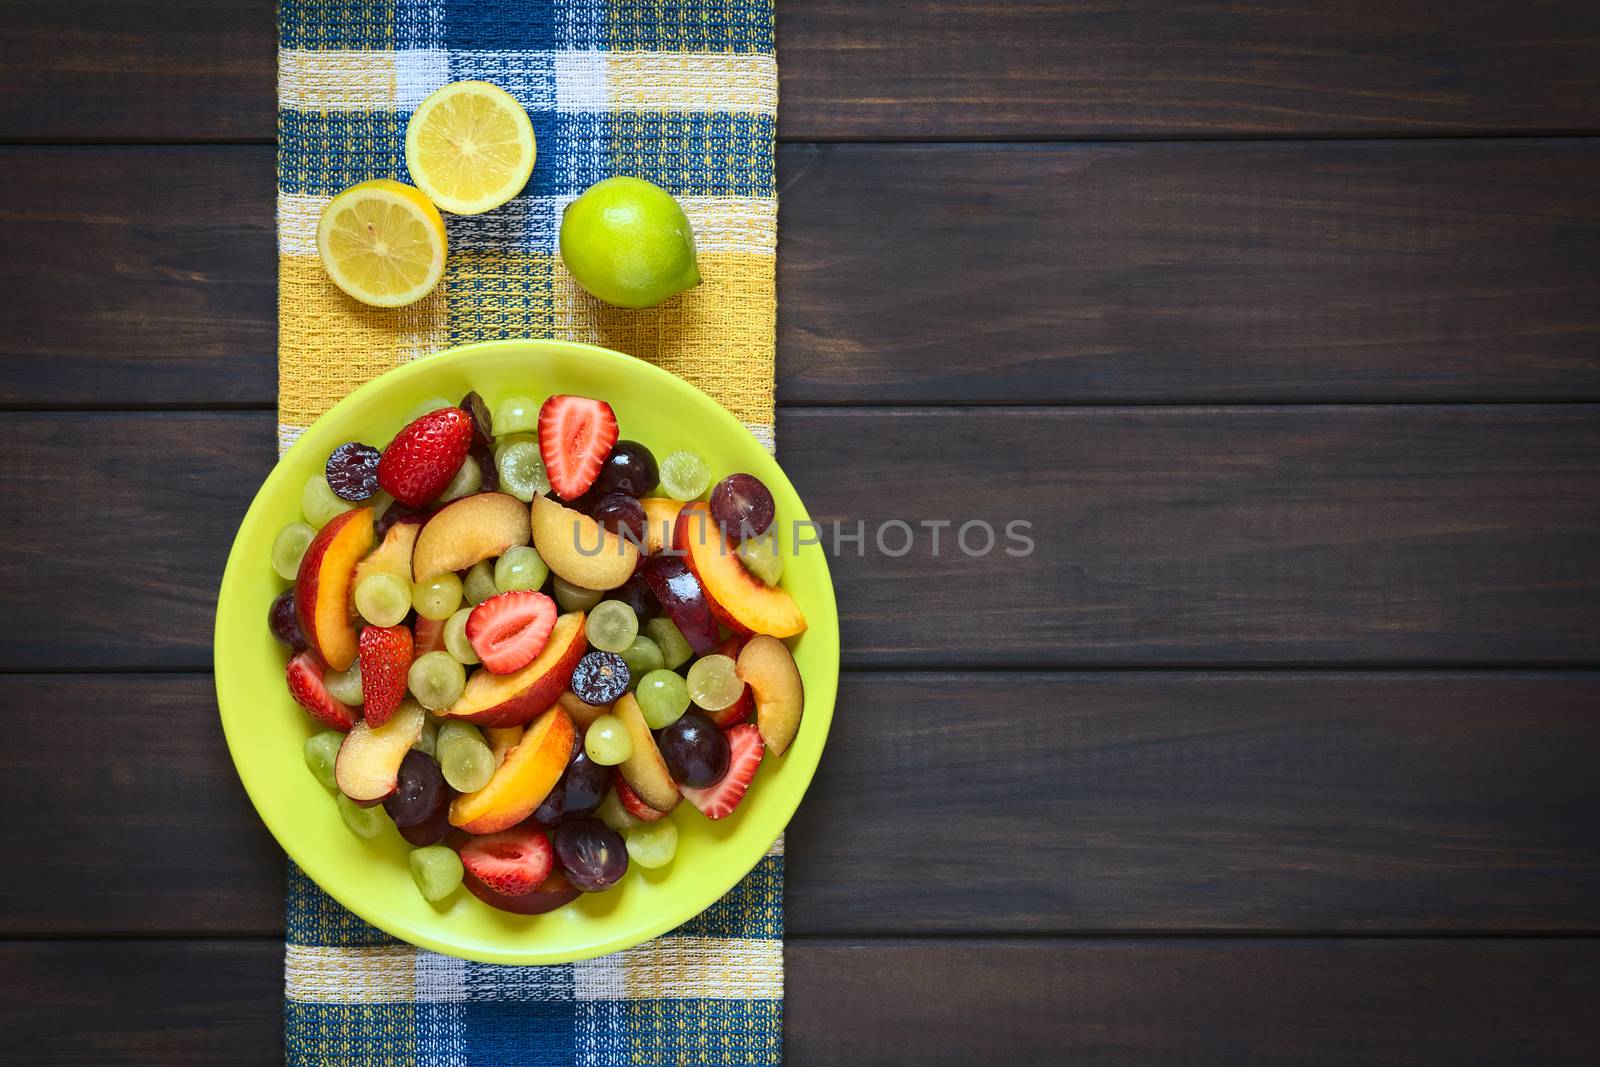 Overhead shot of fresh fruit salad made of grape, strawberry, plum and nectarine served on plate with lemon above, photographed on dark wood with natural light